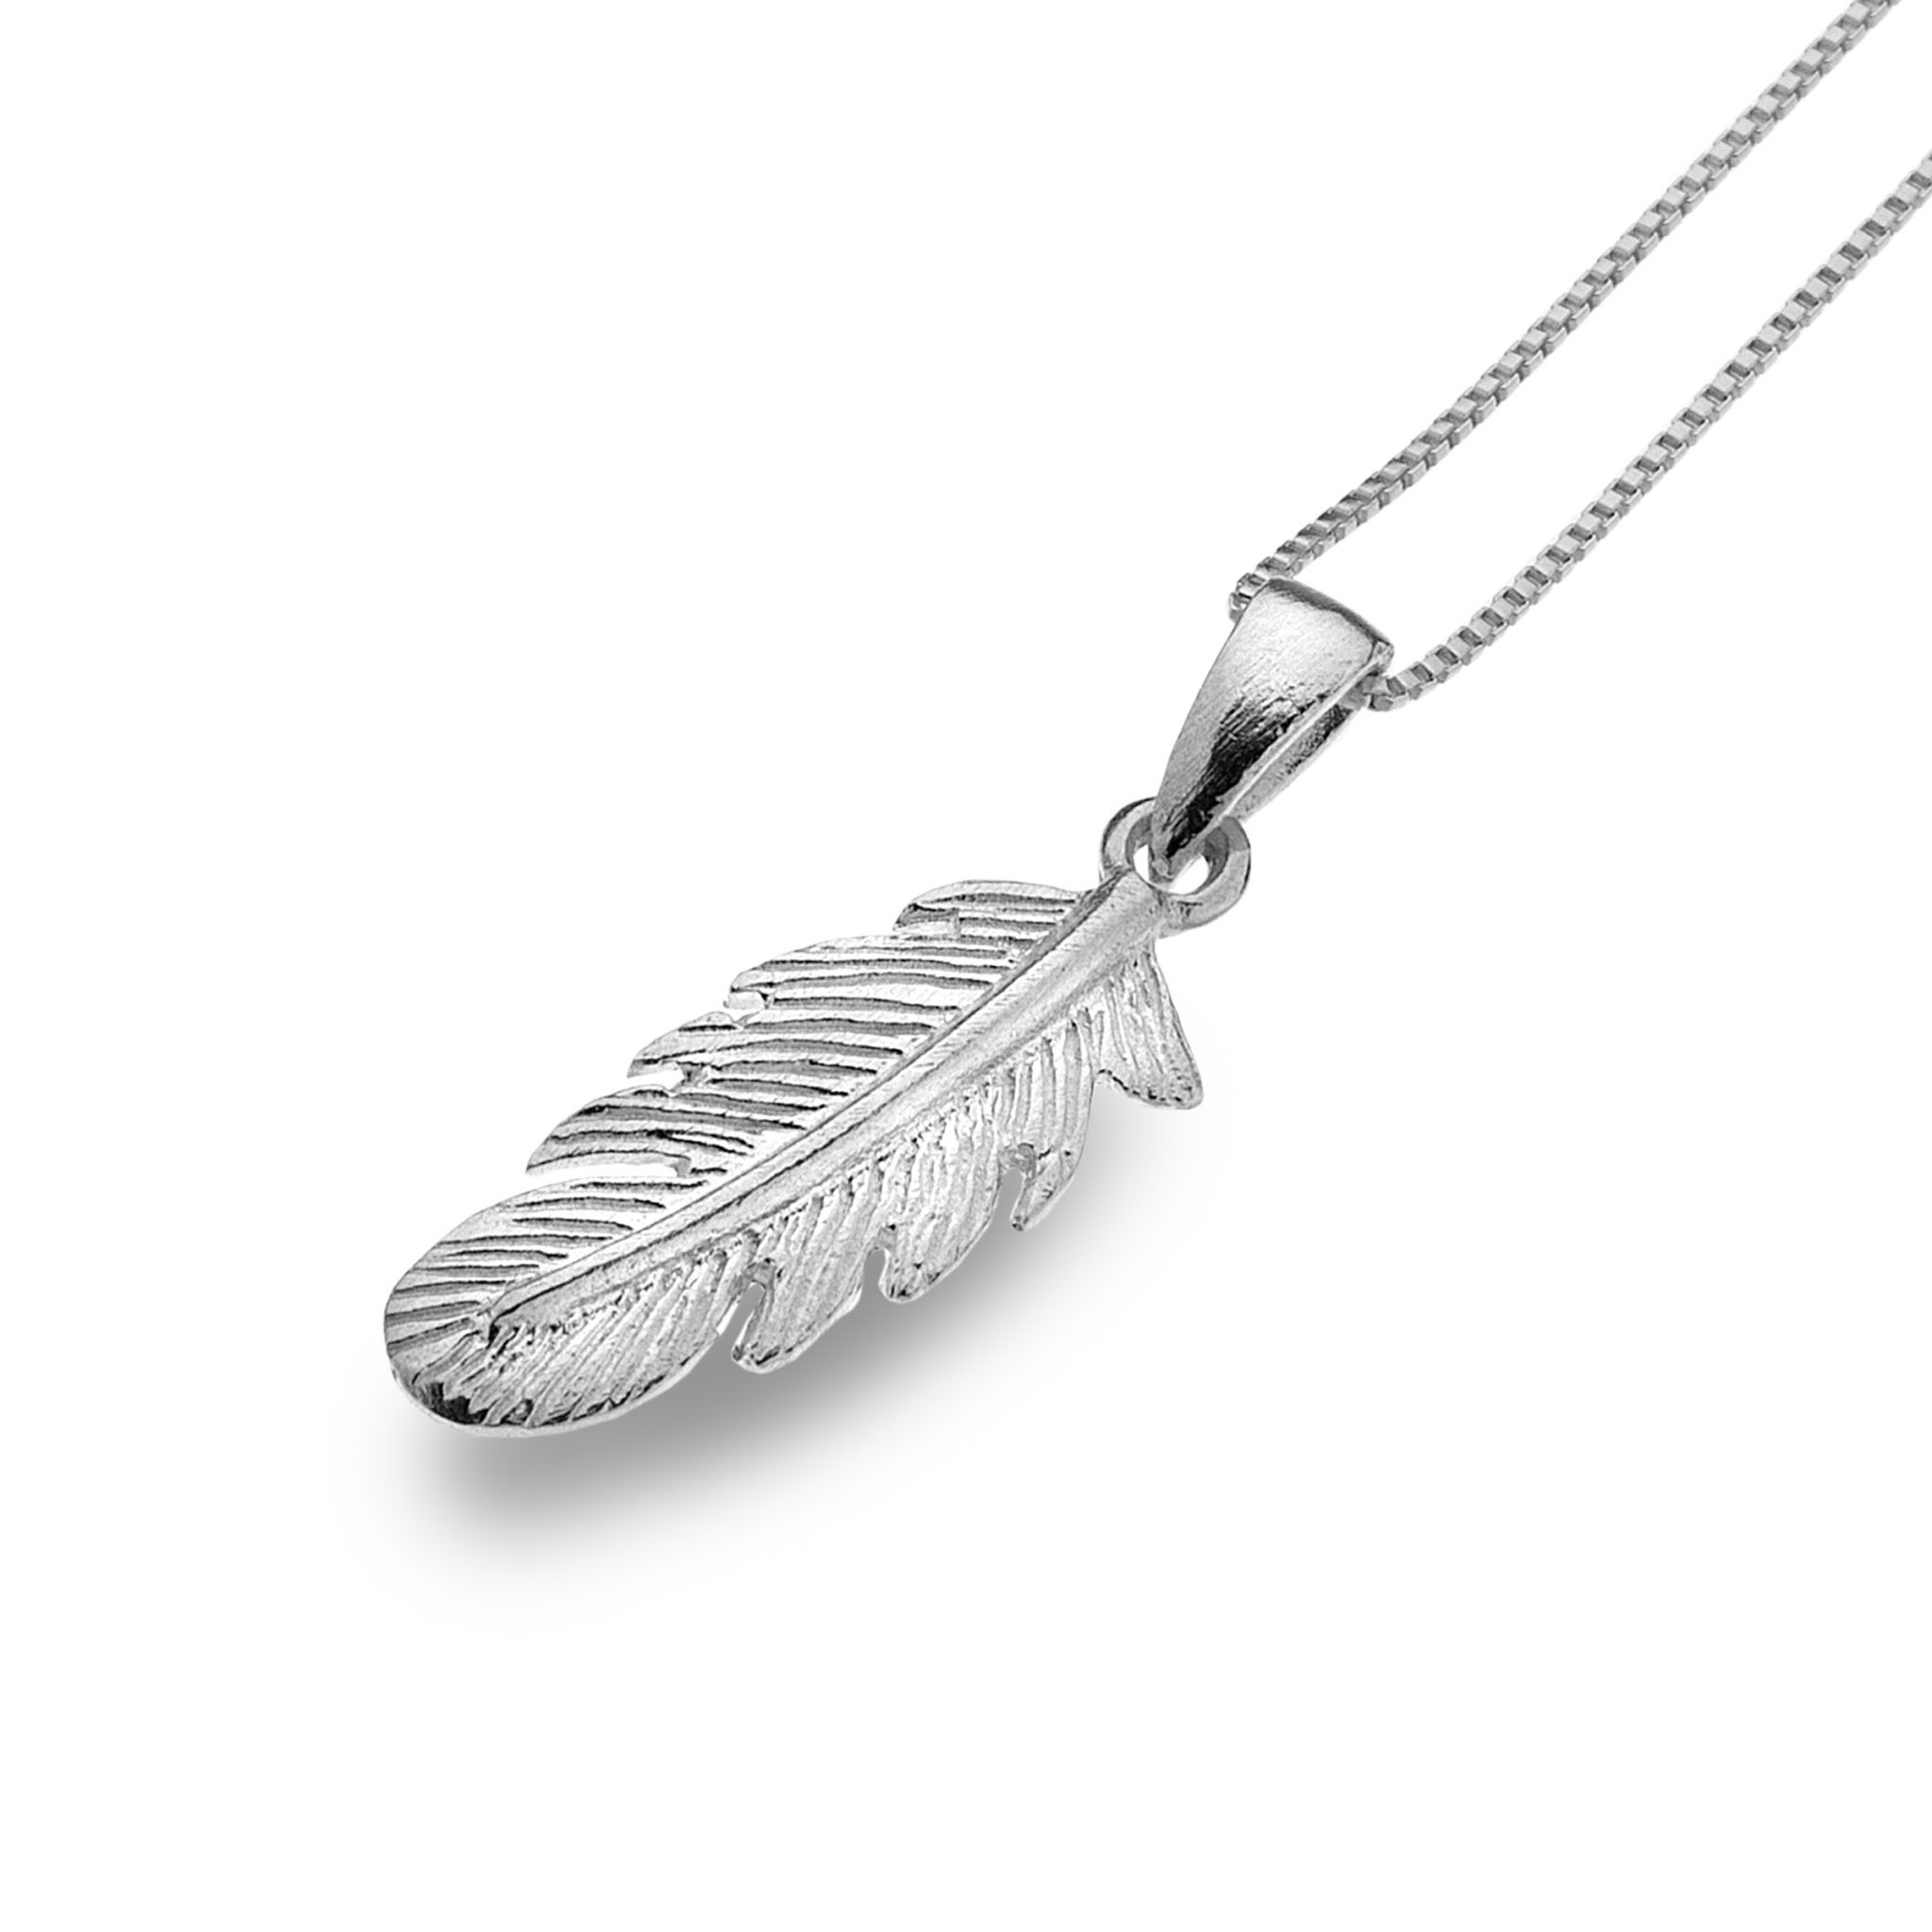 Sterling Silver Single Feather Pendant | Reppin & Jones Jewellers In Most Up To Date Single Feather Pendant Necklaces (View 8 of 25)